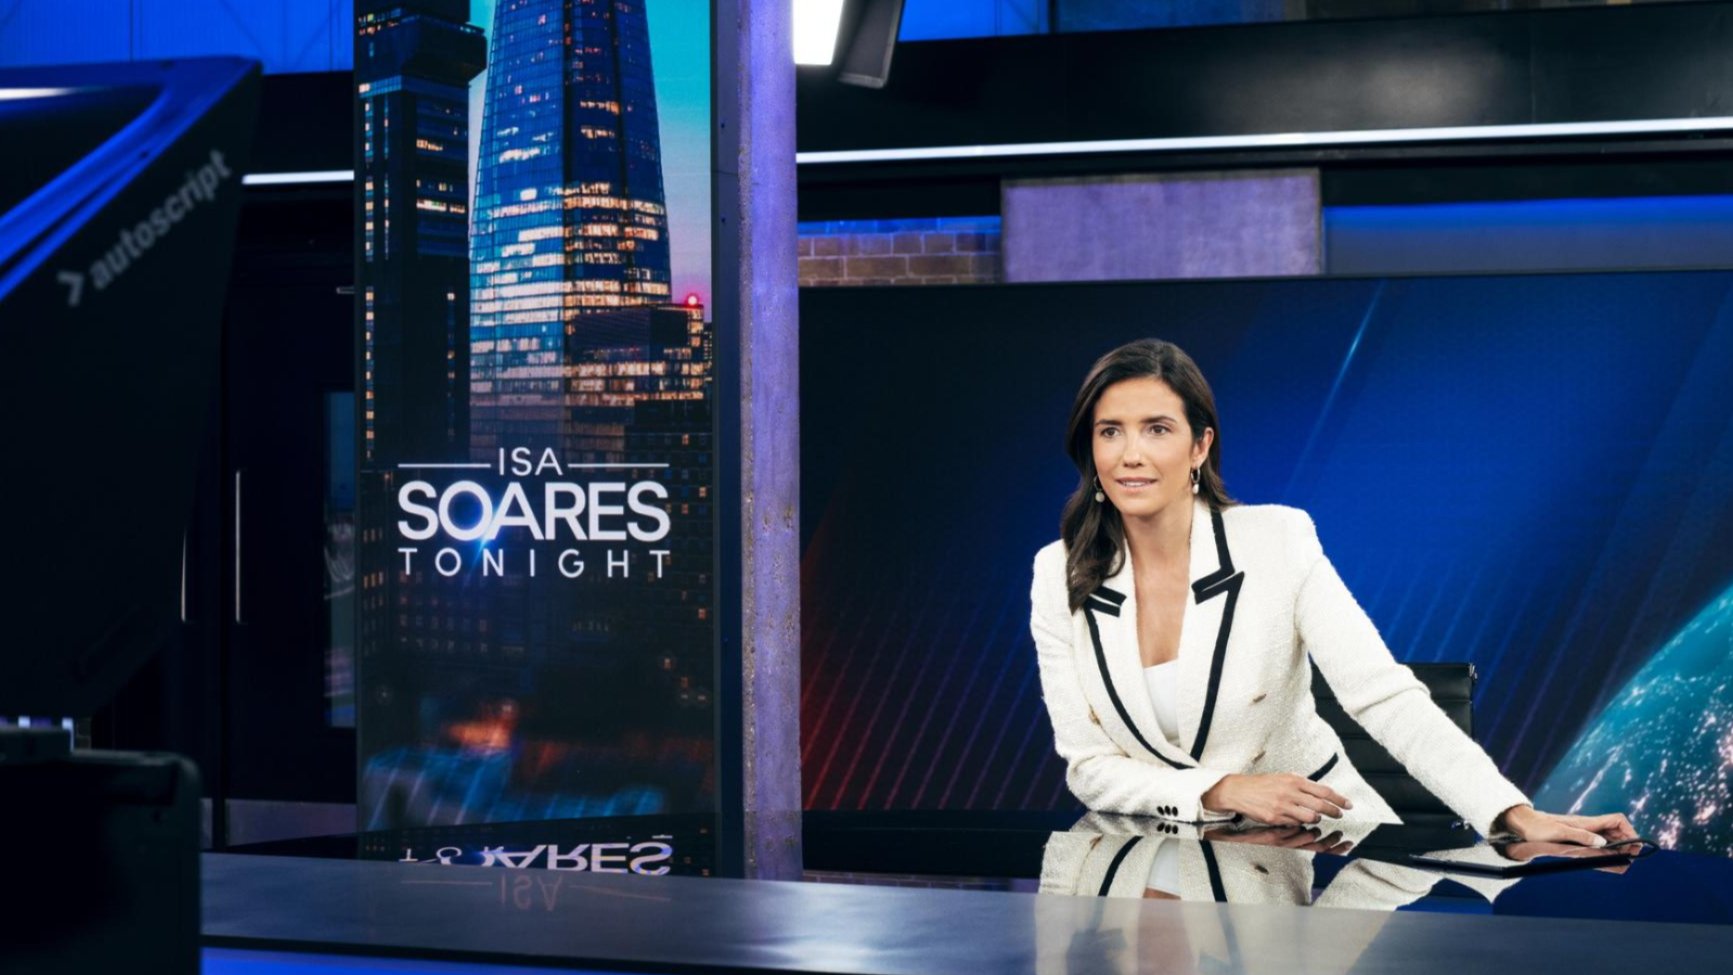 Soares on set of her new show